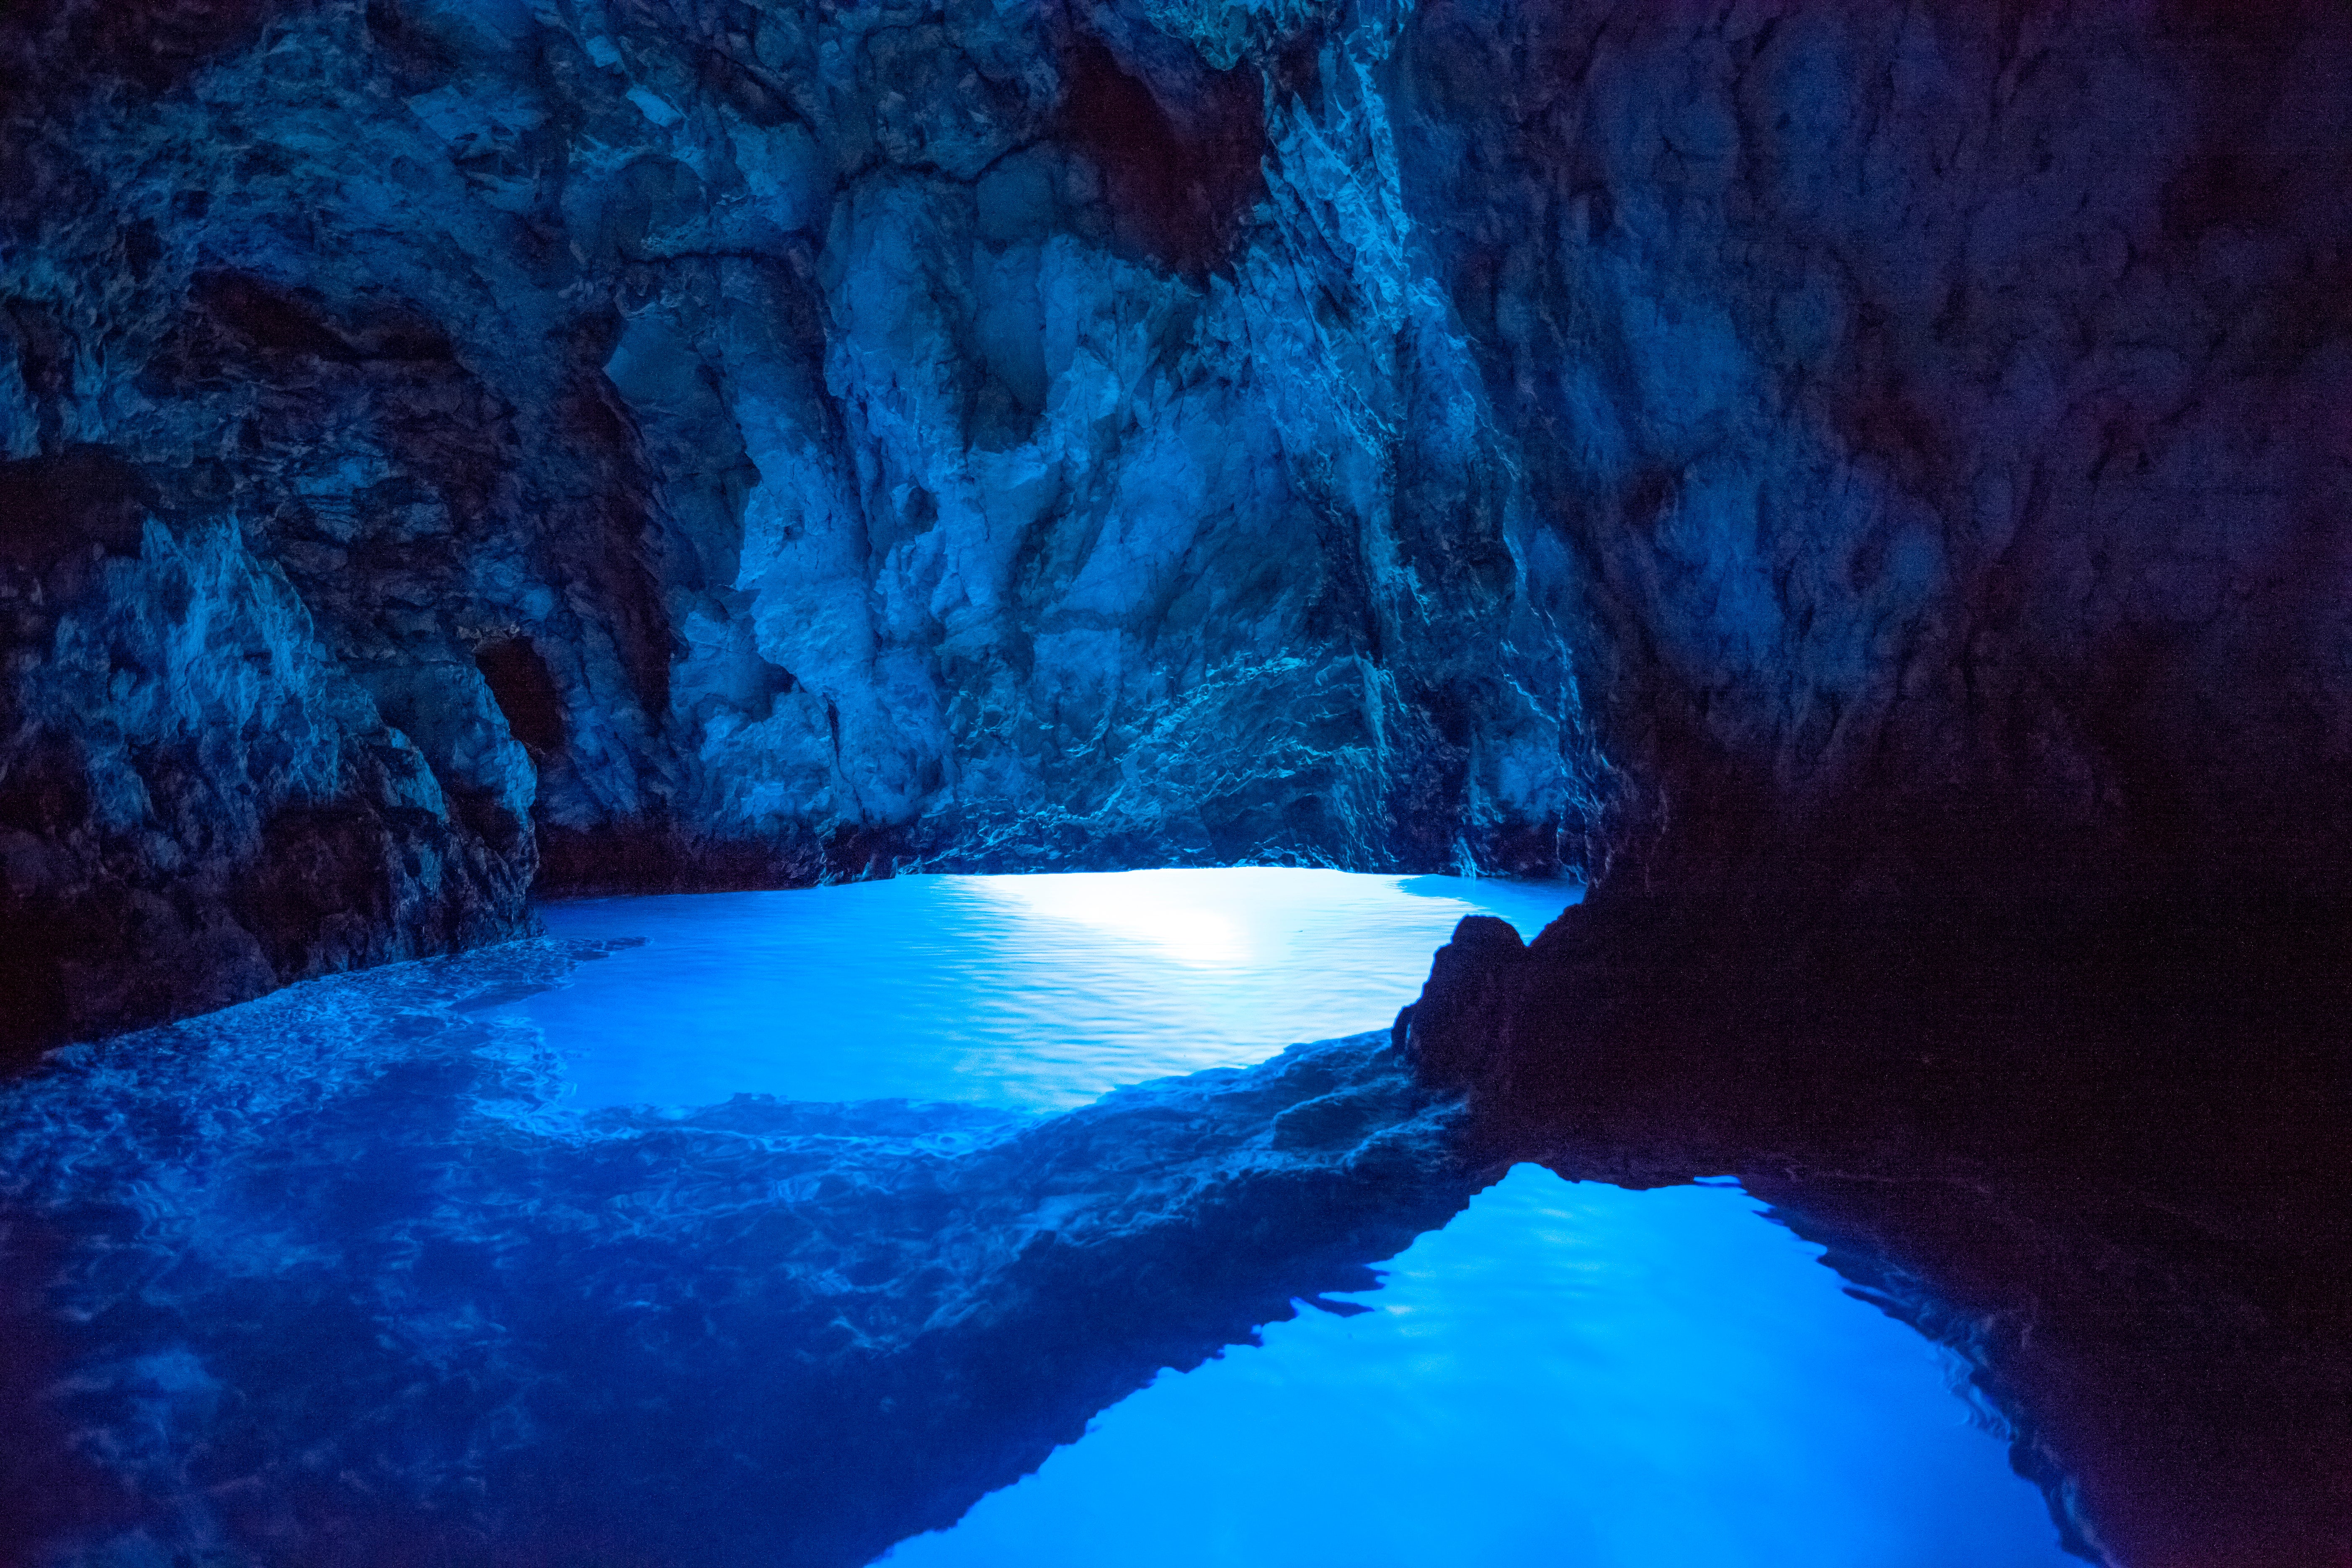 Discover an underwater world at the magical sea cave of Bisevo Grotto